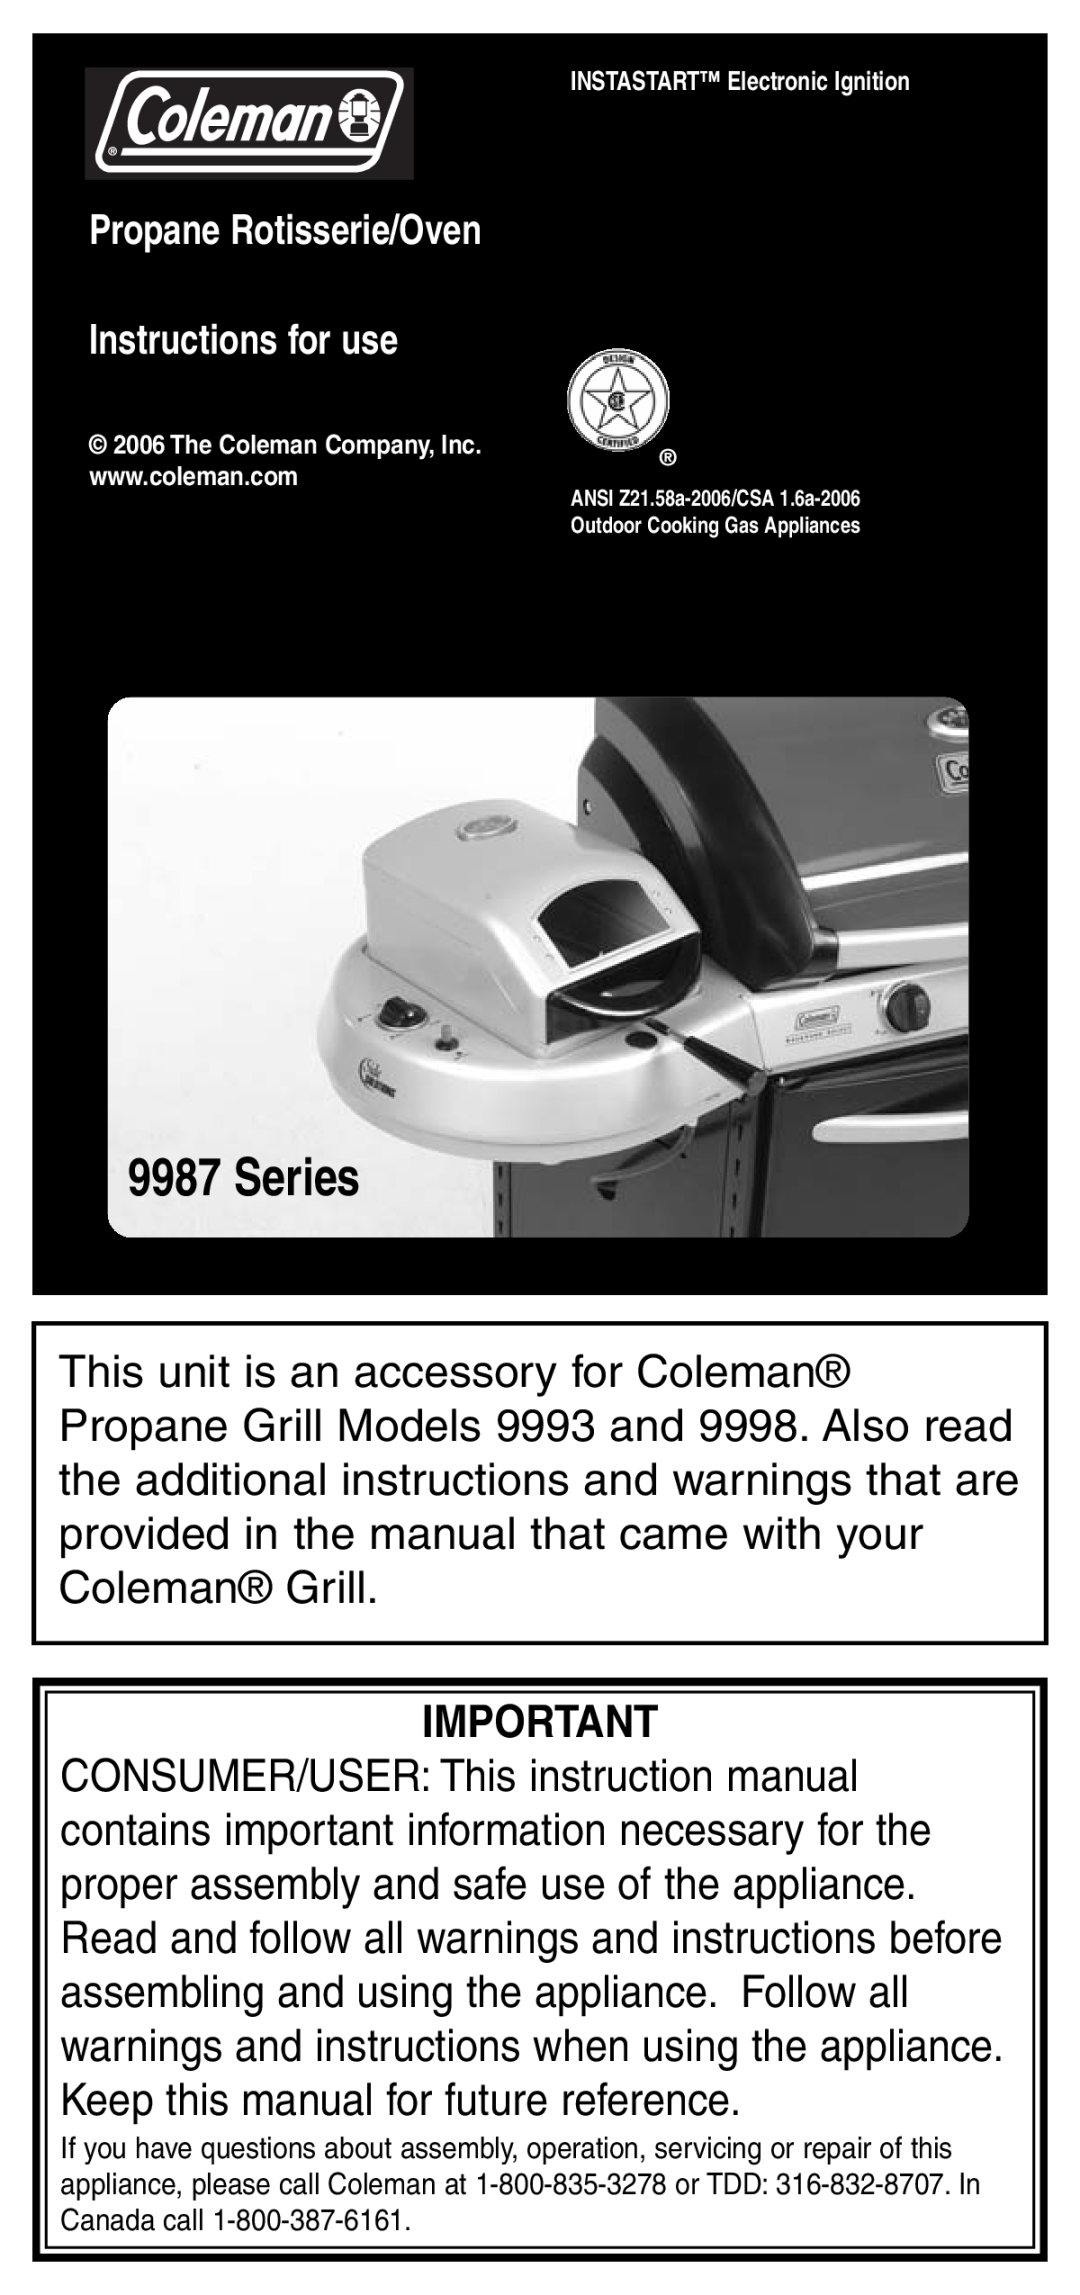 Coleman 9987 Series instruction manual Instructions for use 